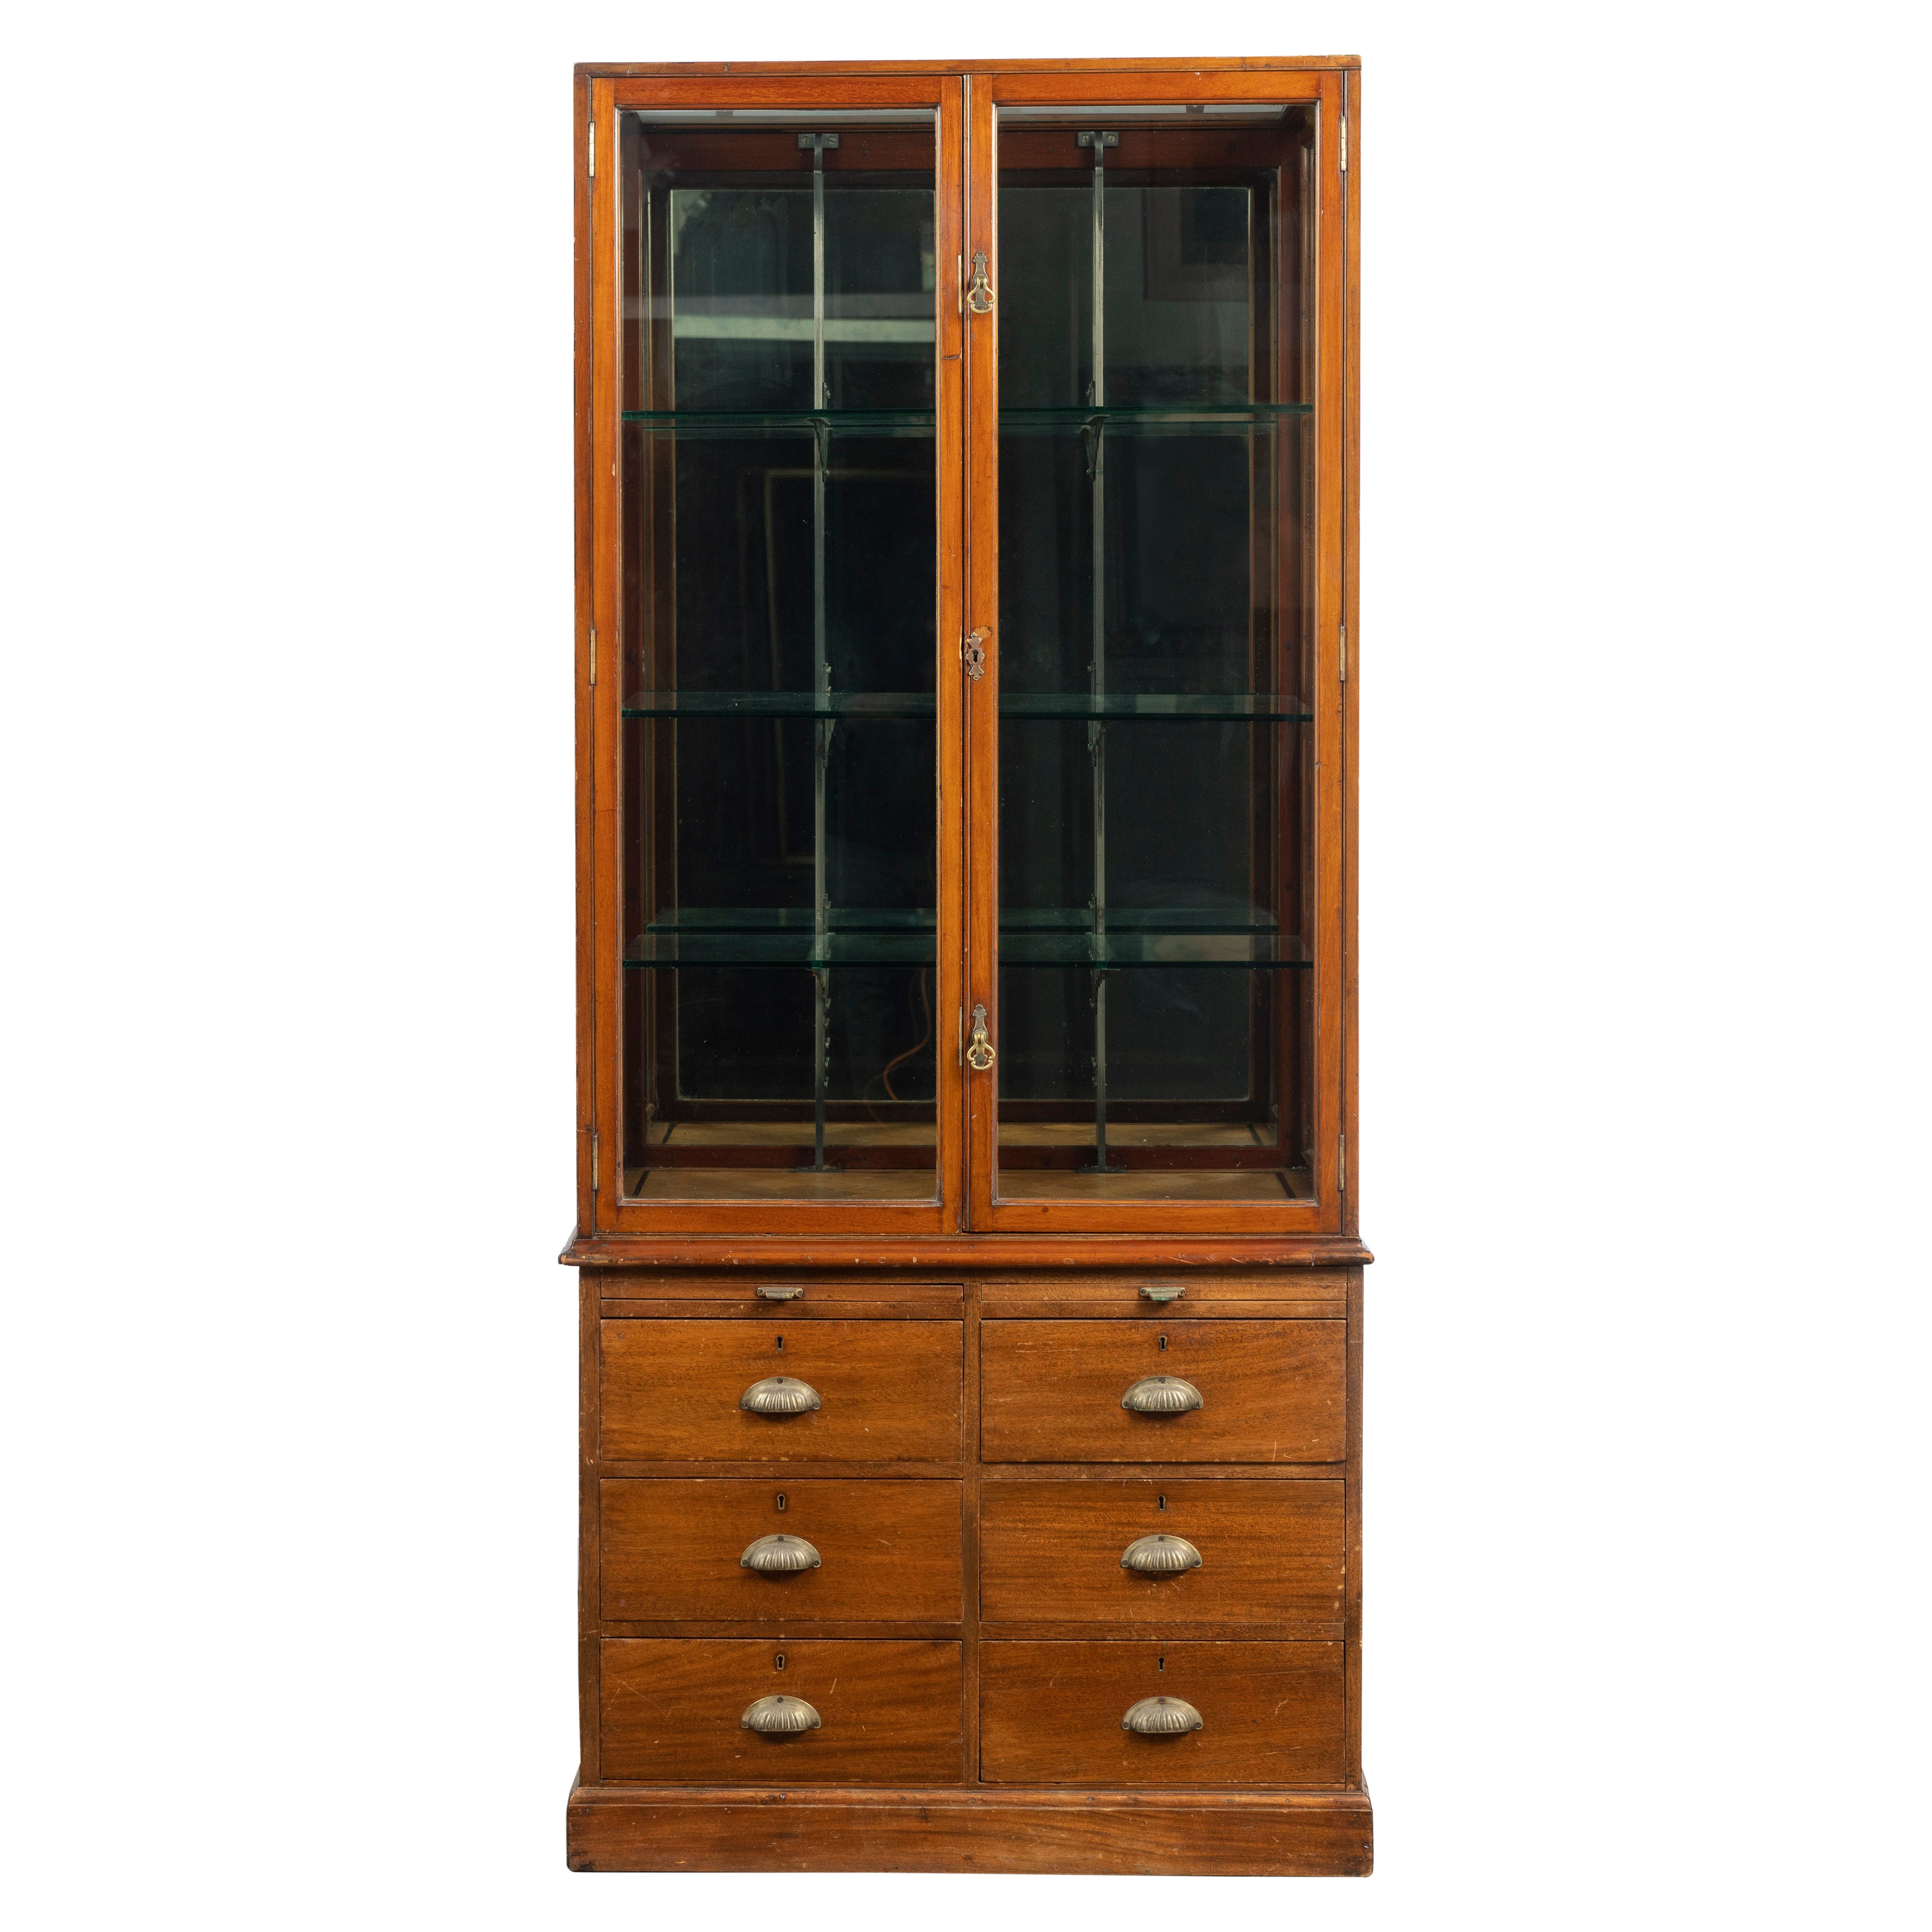 Antique English Haberdashery or Apothecary Cabinet, with Wood and Glass For Sale